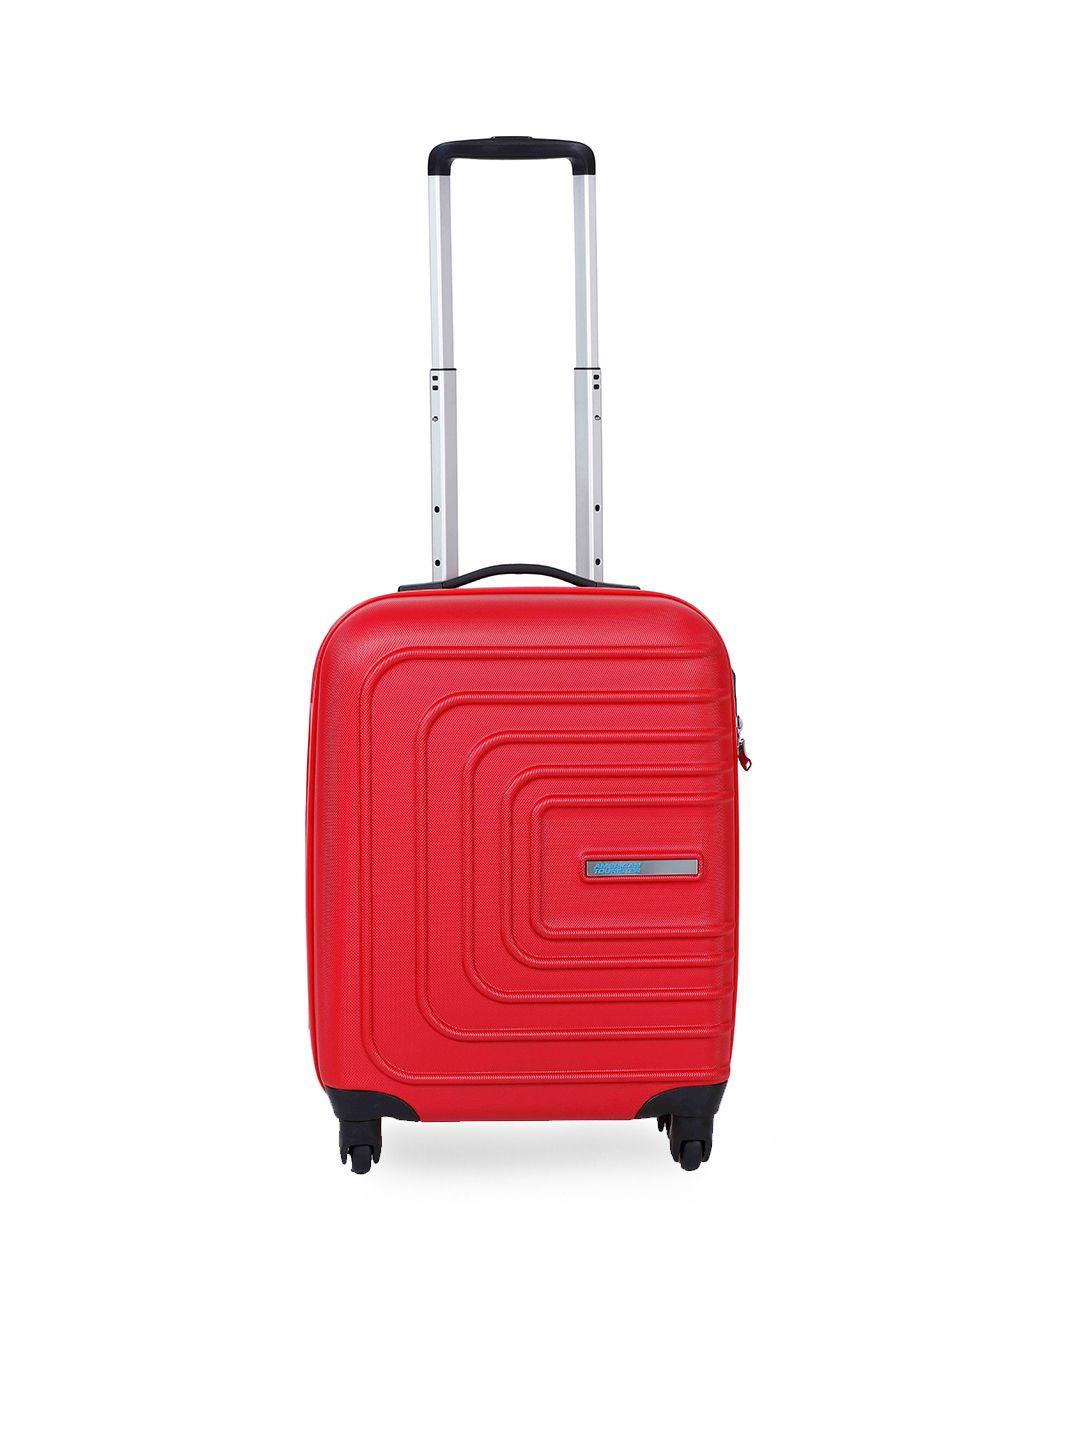 american tourister  unisex red small trolley suitcase